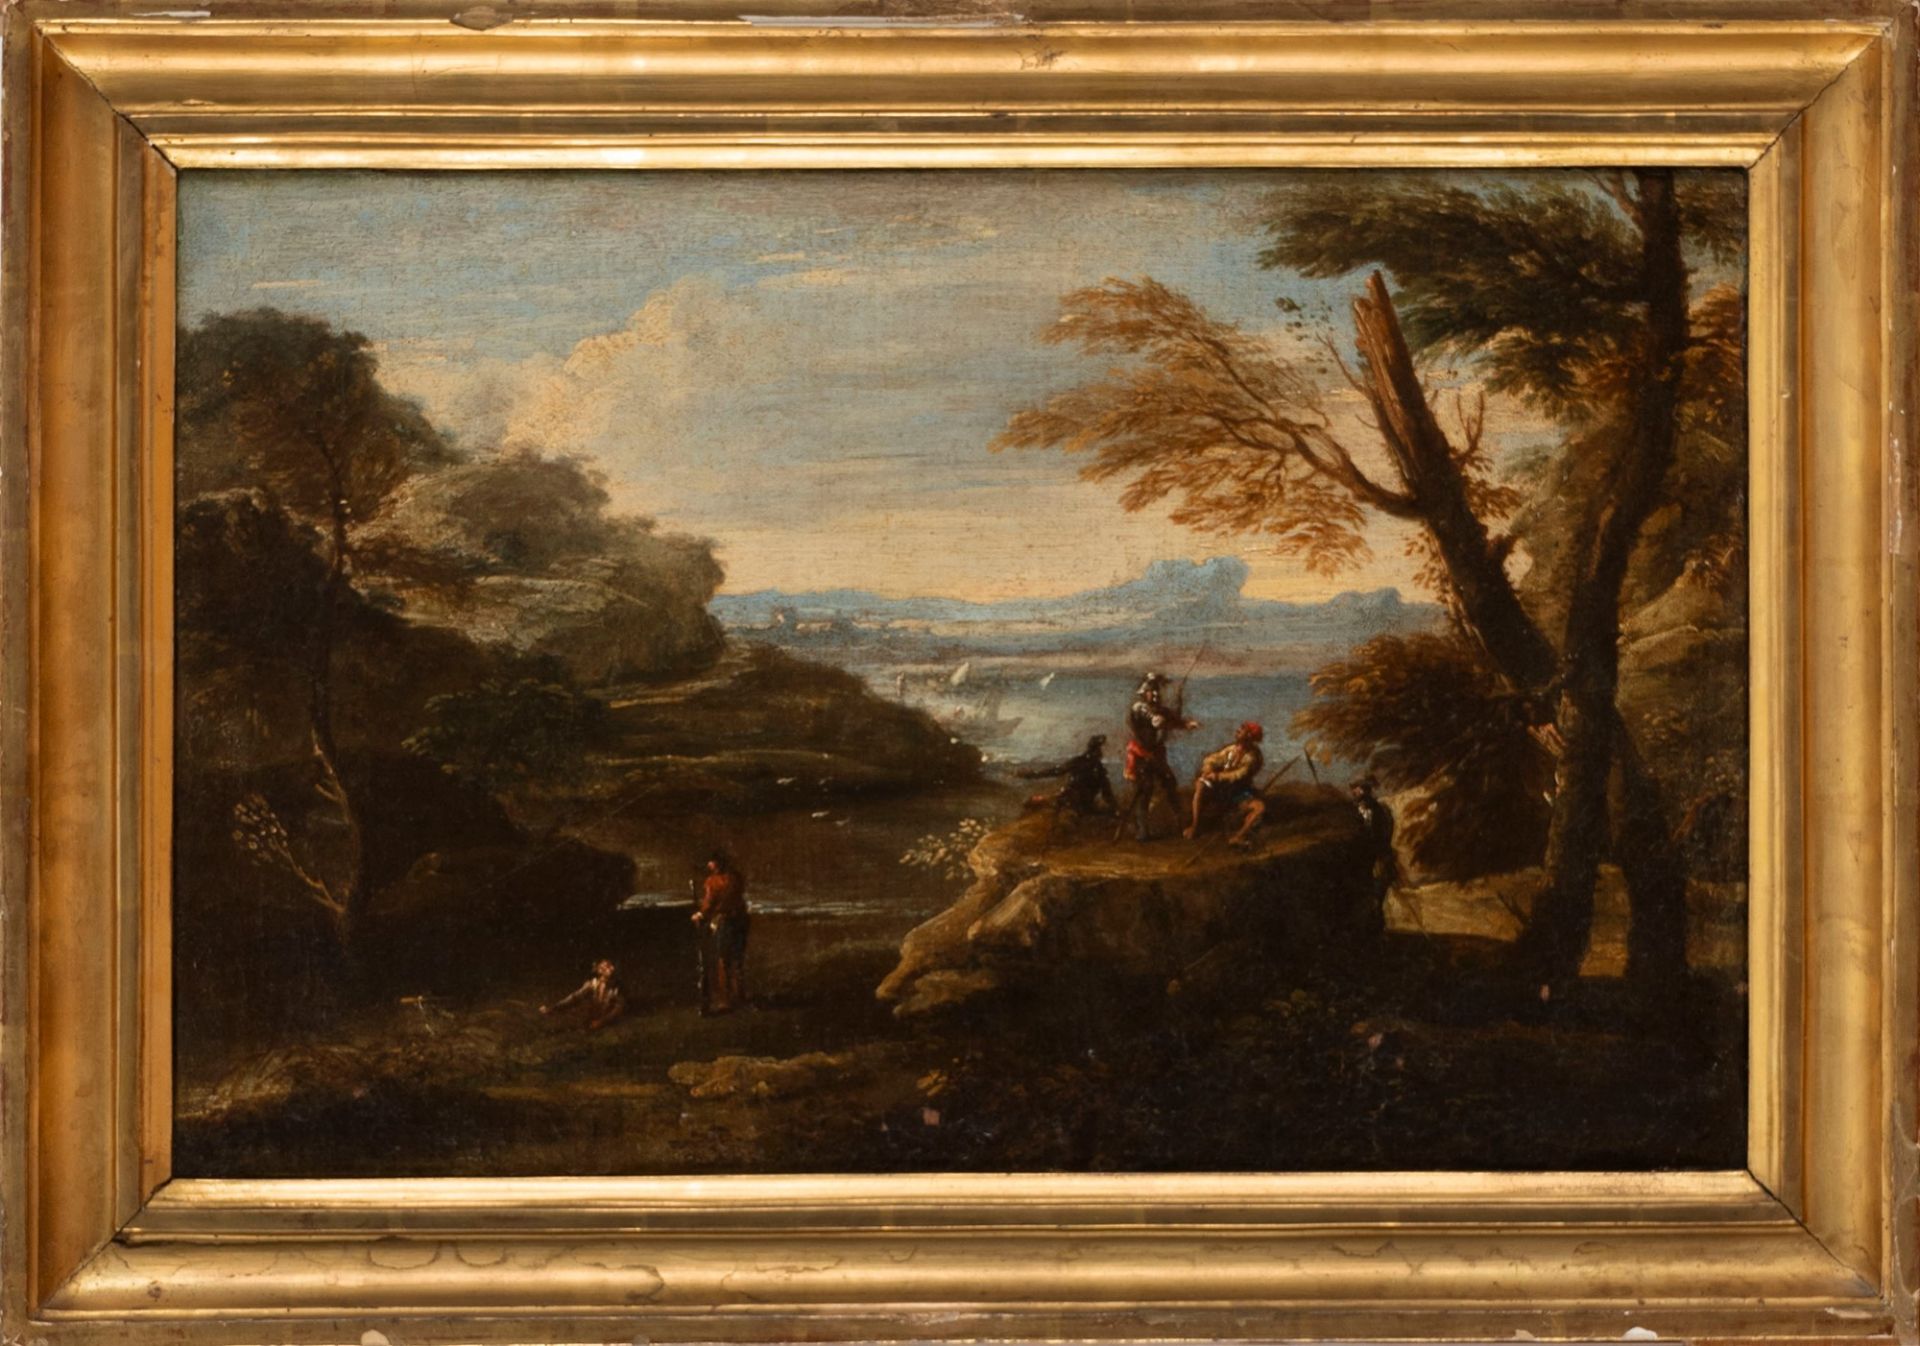 Neapolitan school, XVII century - Two landscapes with figures - Image 2 of 5